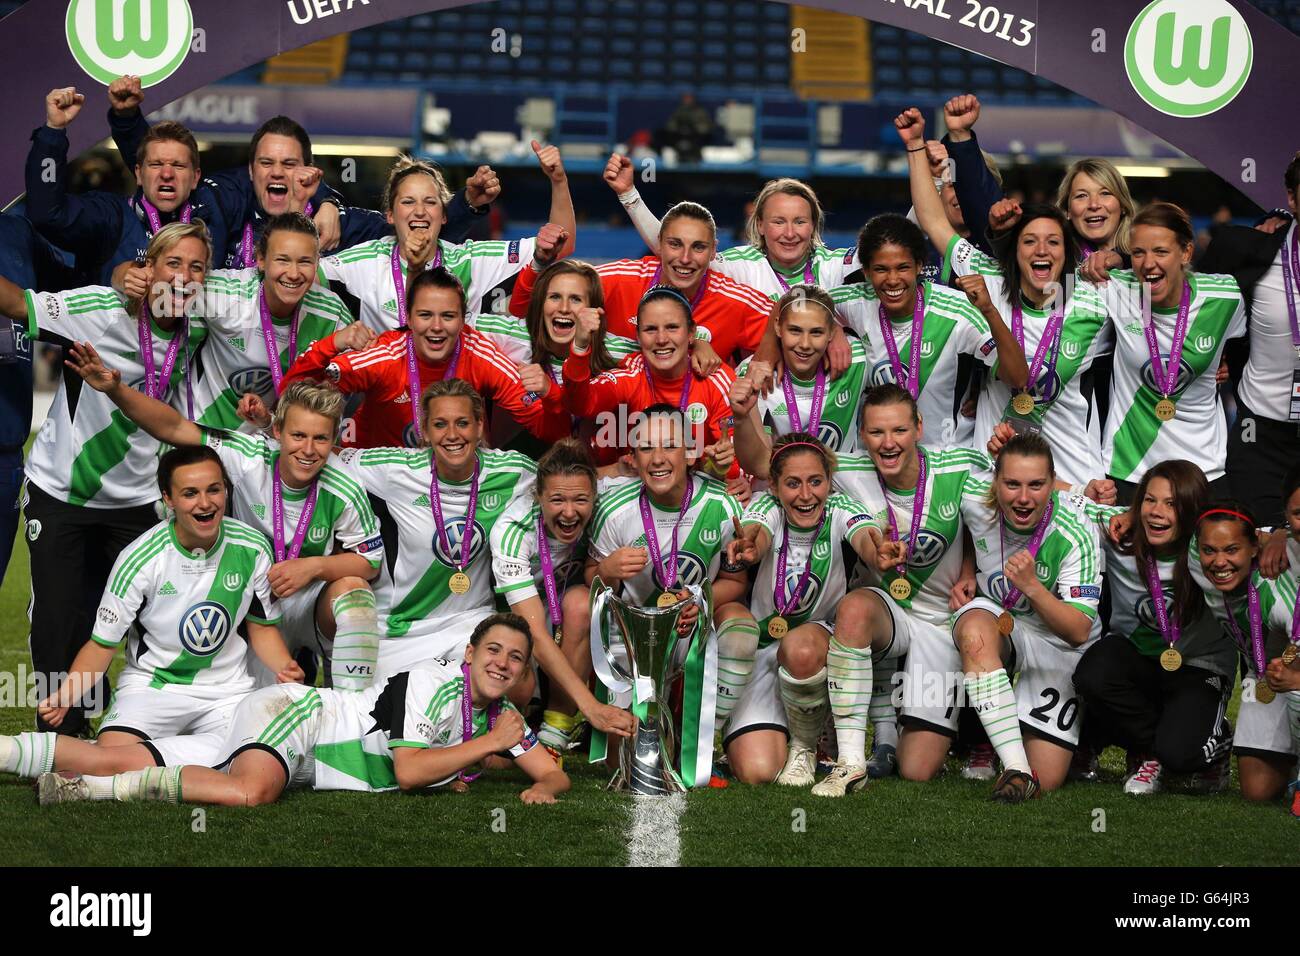 Vfl Wolfsburg's players celebrate victory over Olympique Lyonnais during the Women's UEFA Champions League Final at Stamford Bridge, London. Stock Photo